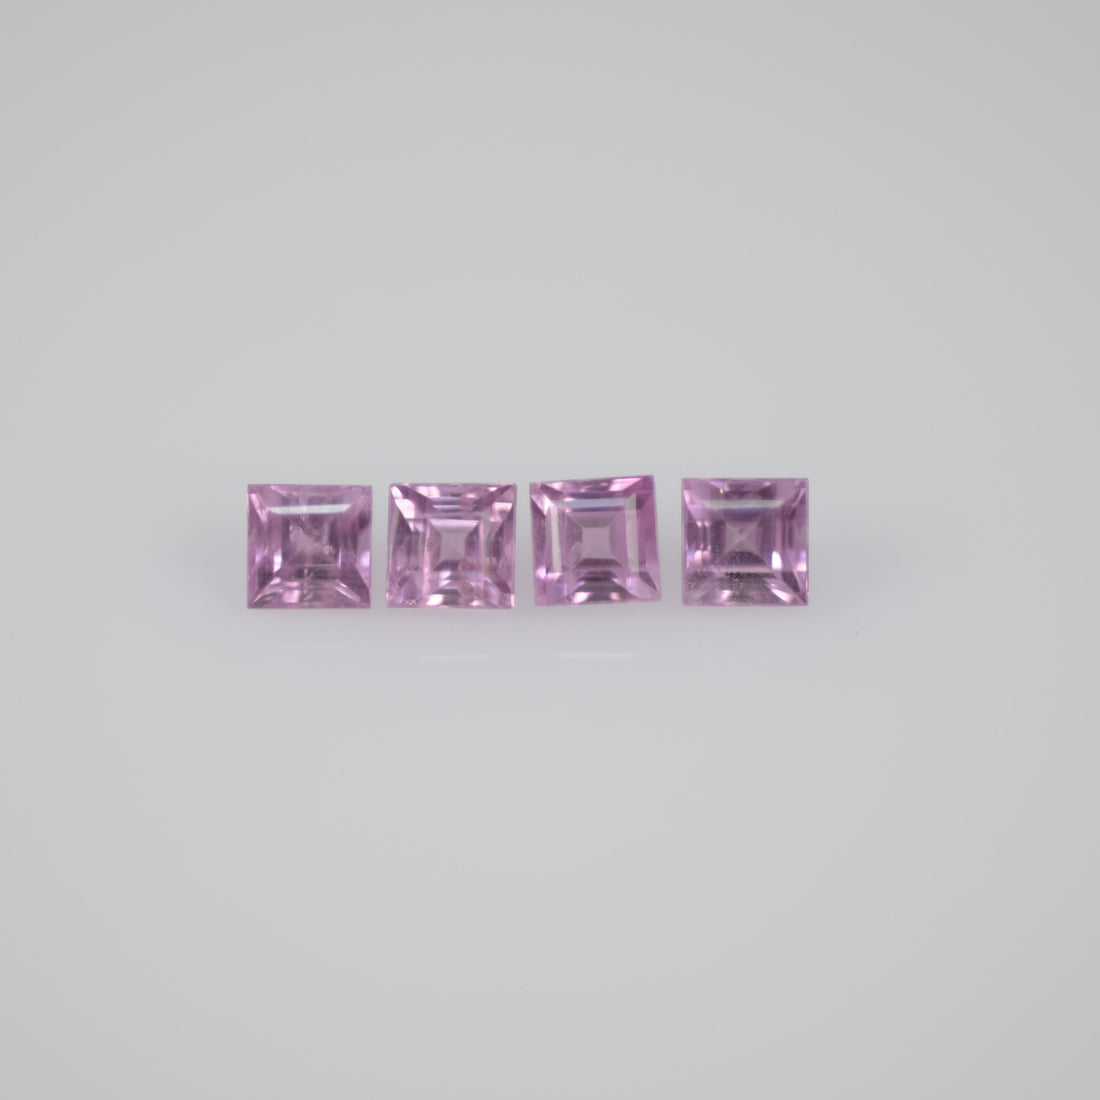 2.2-3.7 mm Natural Callibrated Pink Sapphire Loose Gemstone Square Cut